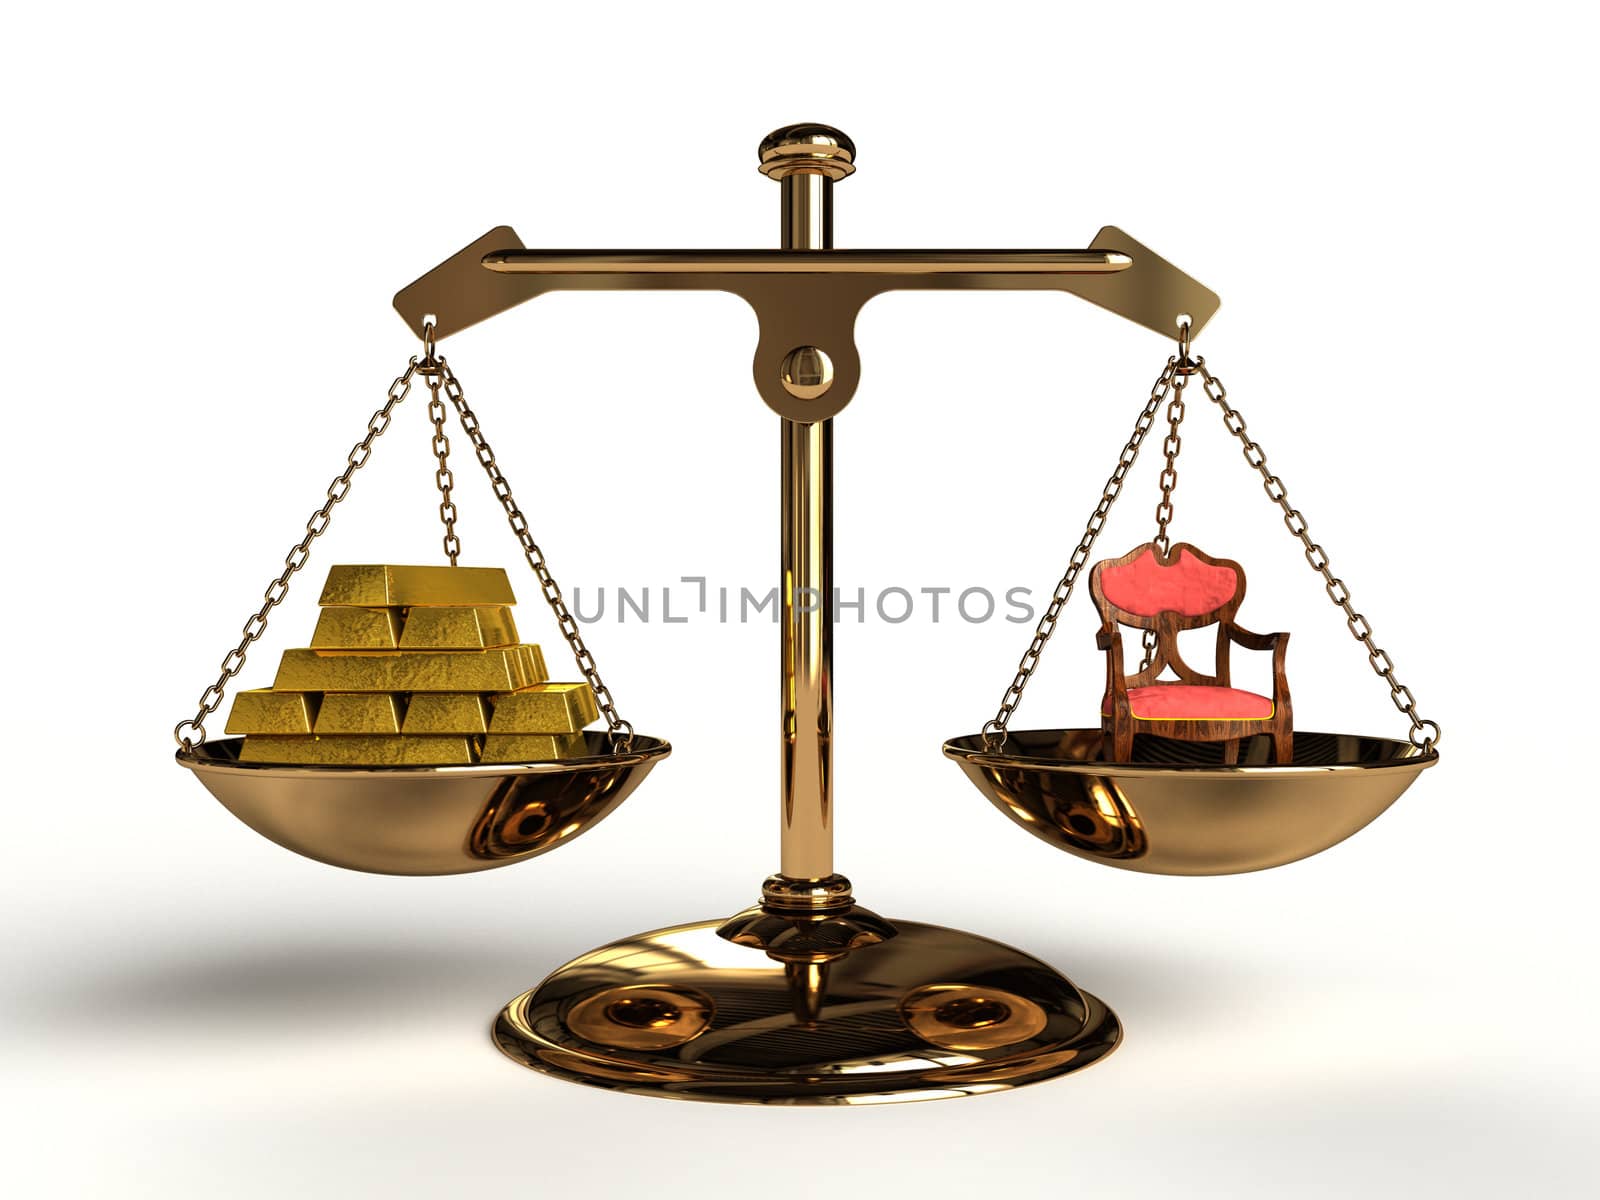 The value of political power. On a golden balance, are compared in an red armchair and a lot of gold bullion, computer-generated conceptual image.